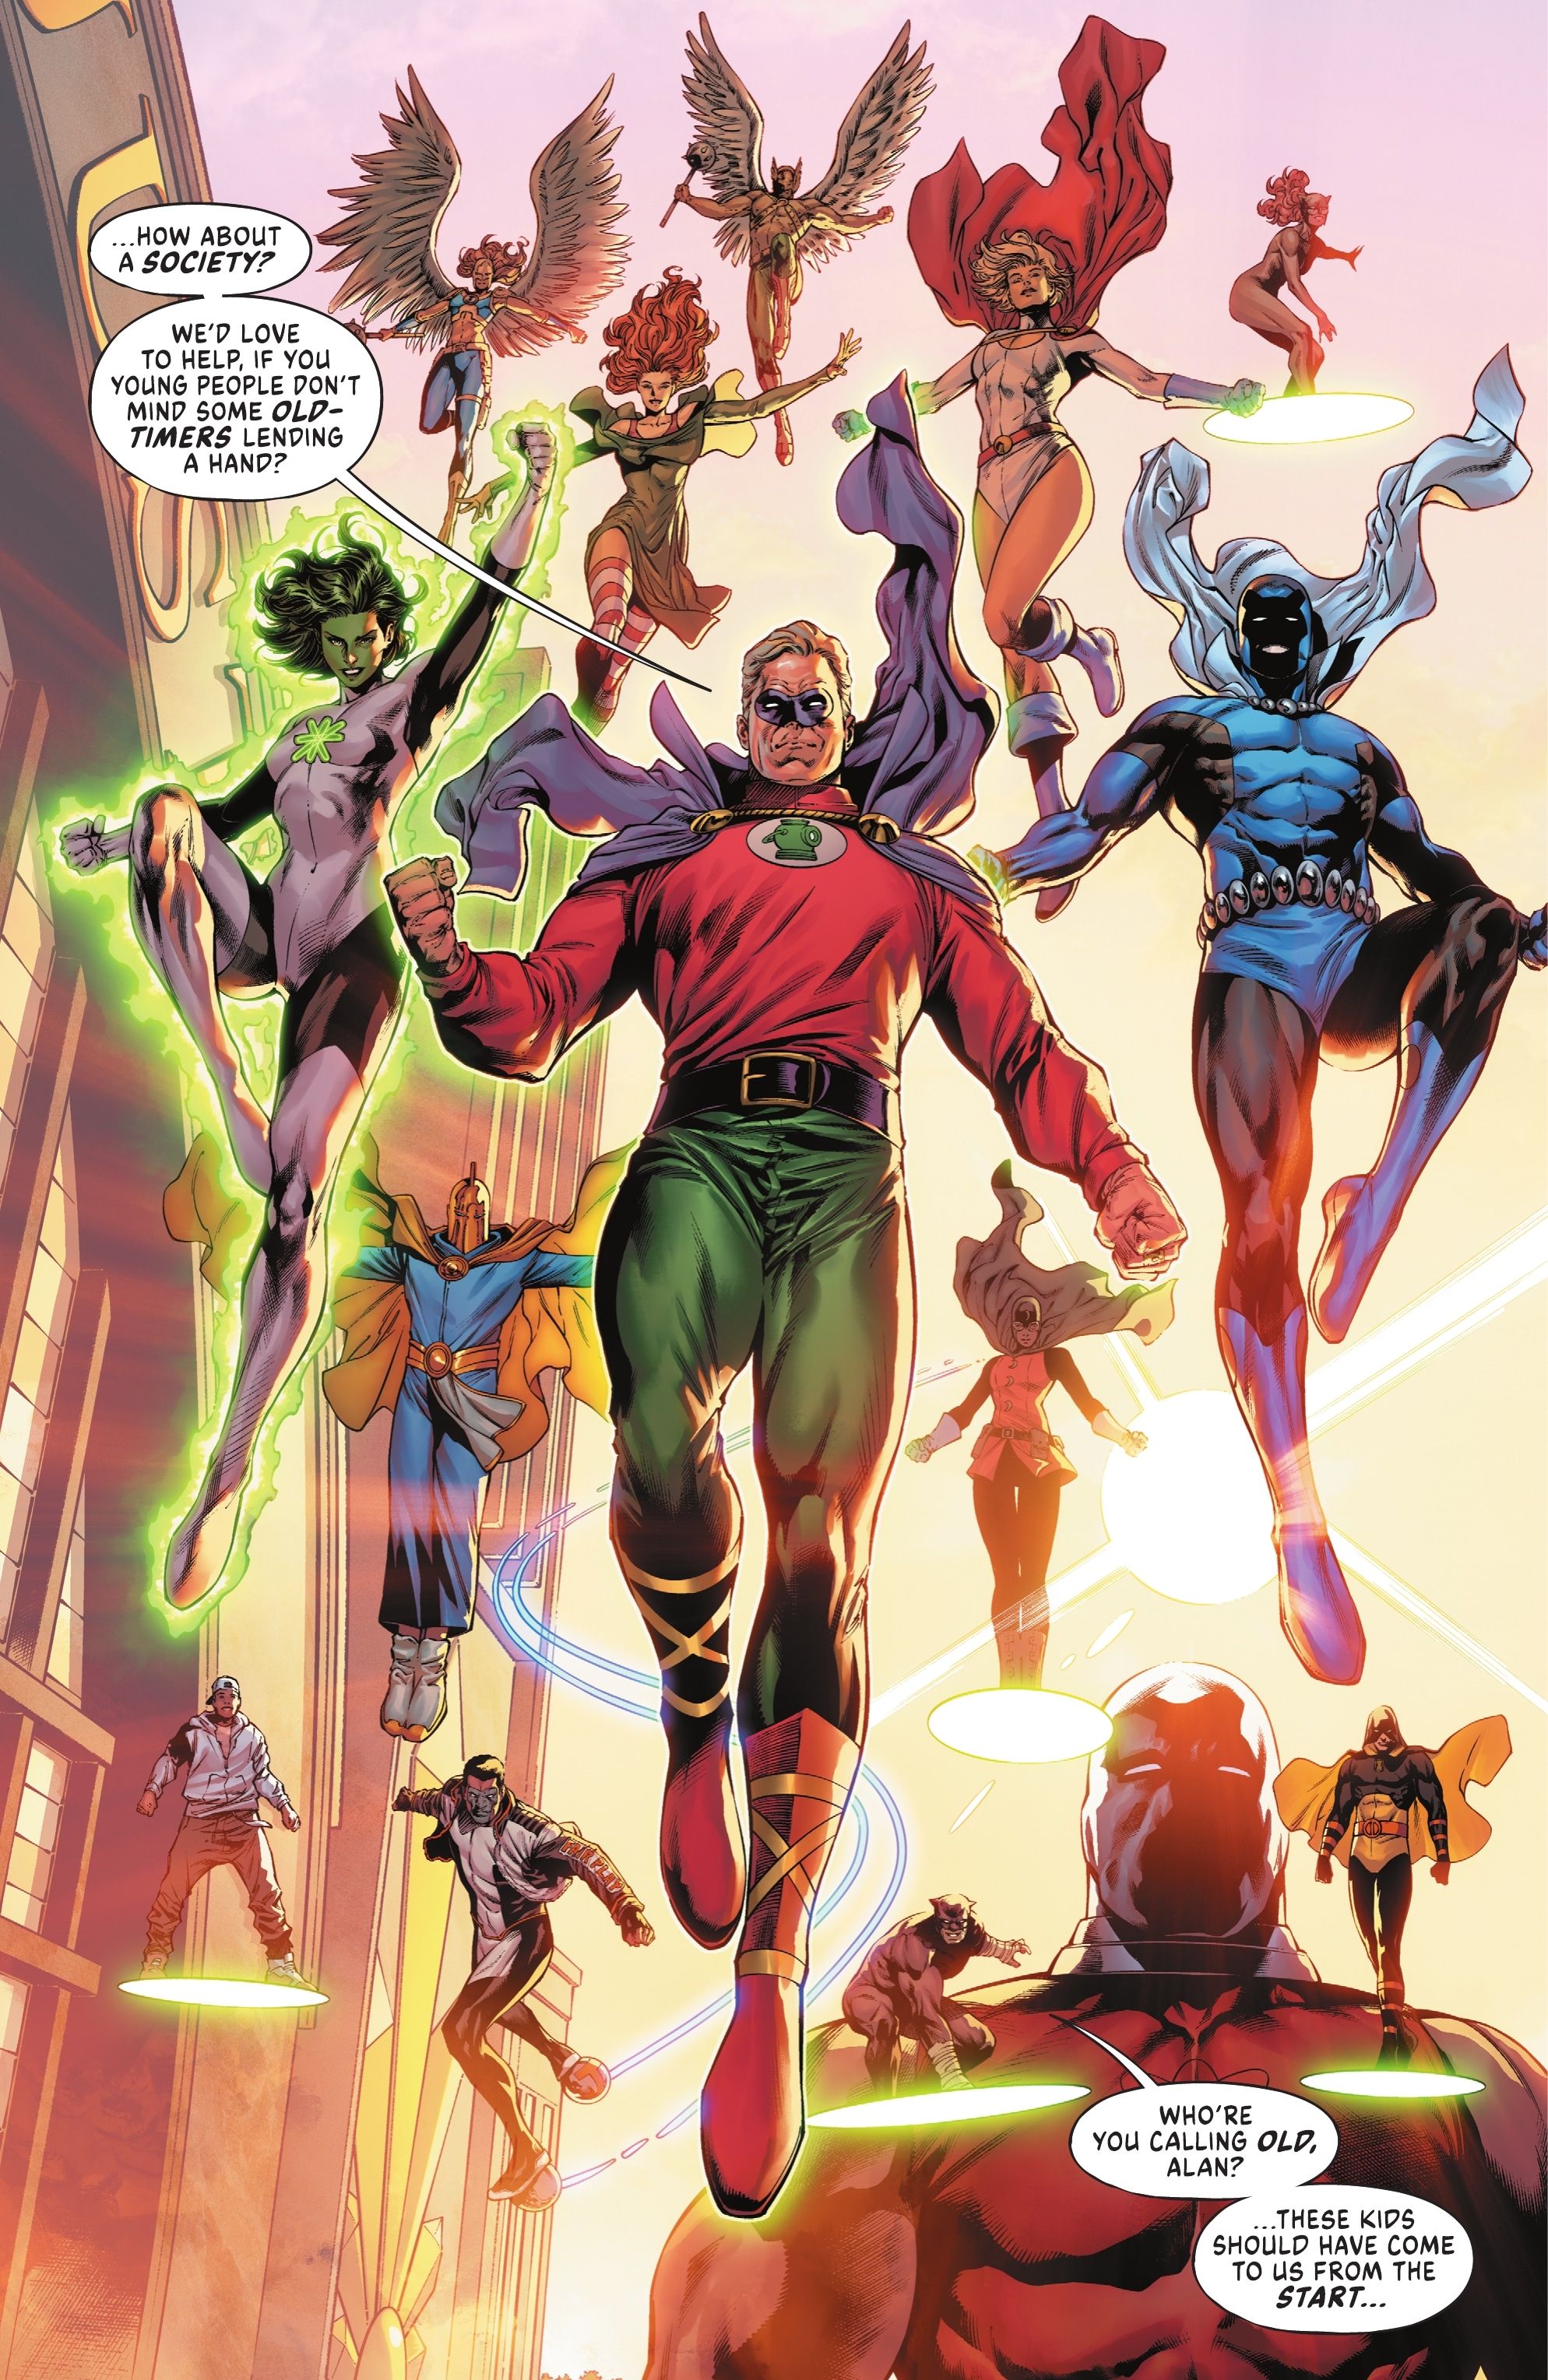 The Justice Society arrives, from Dark Crisis 3